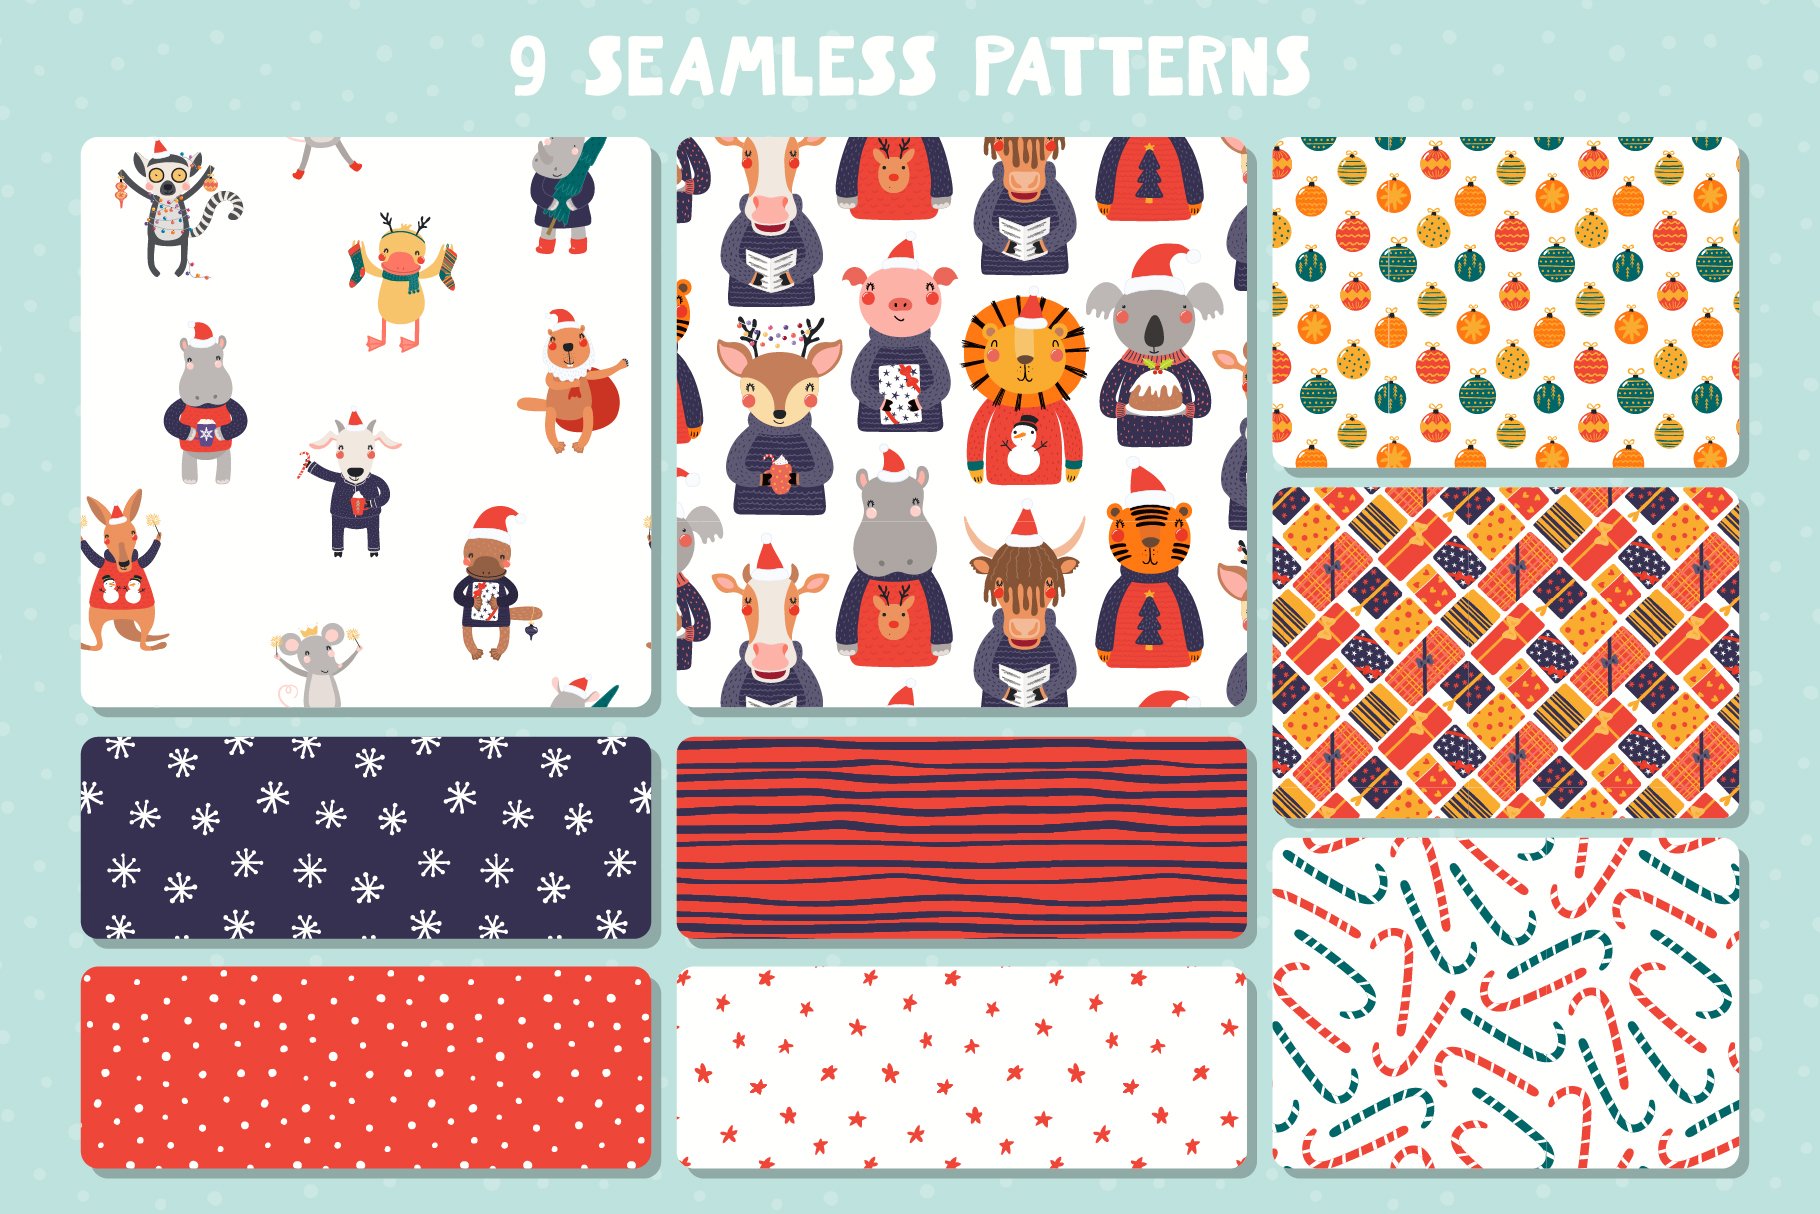 Christmas patterns with different prints.